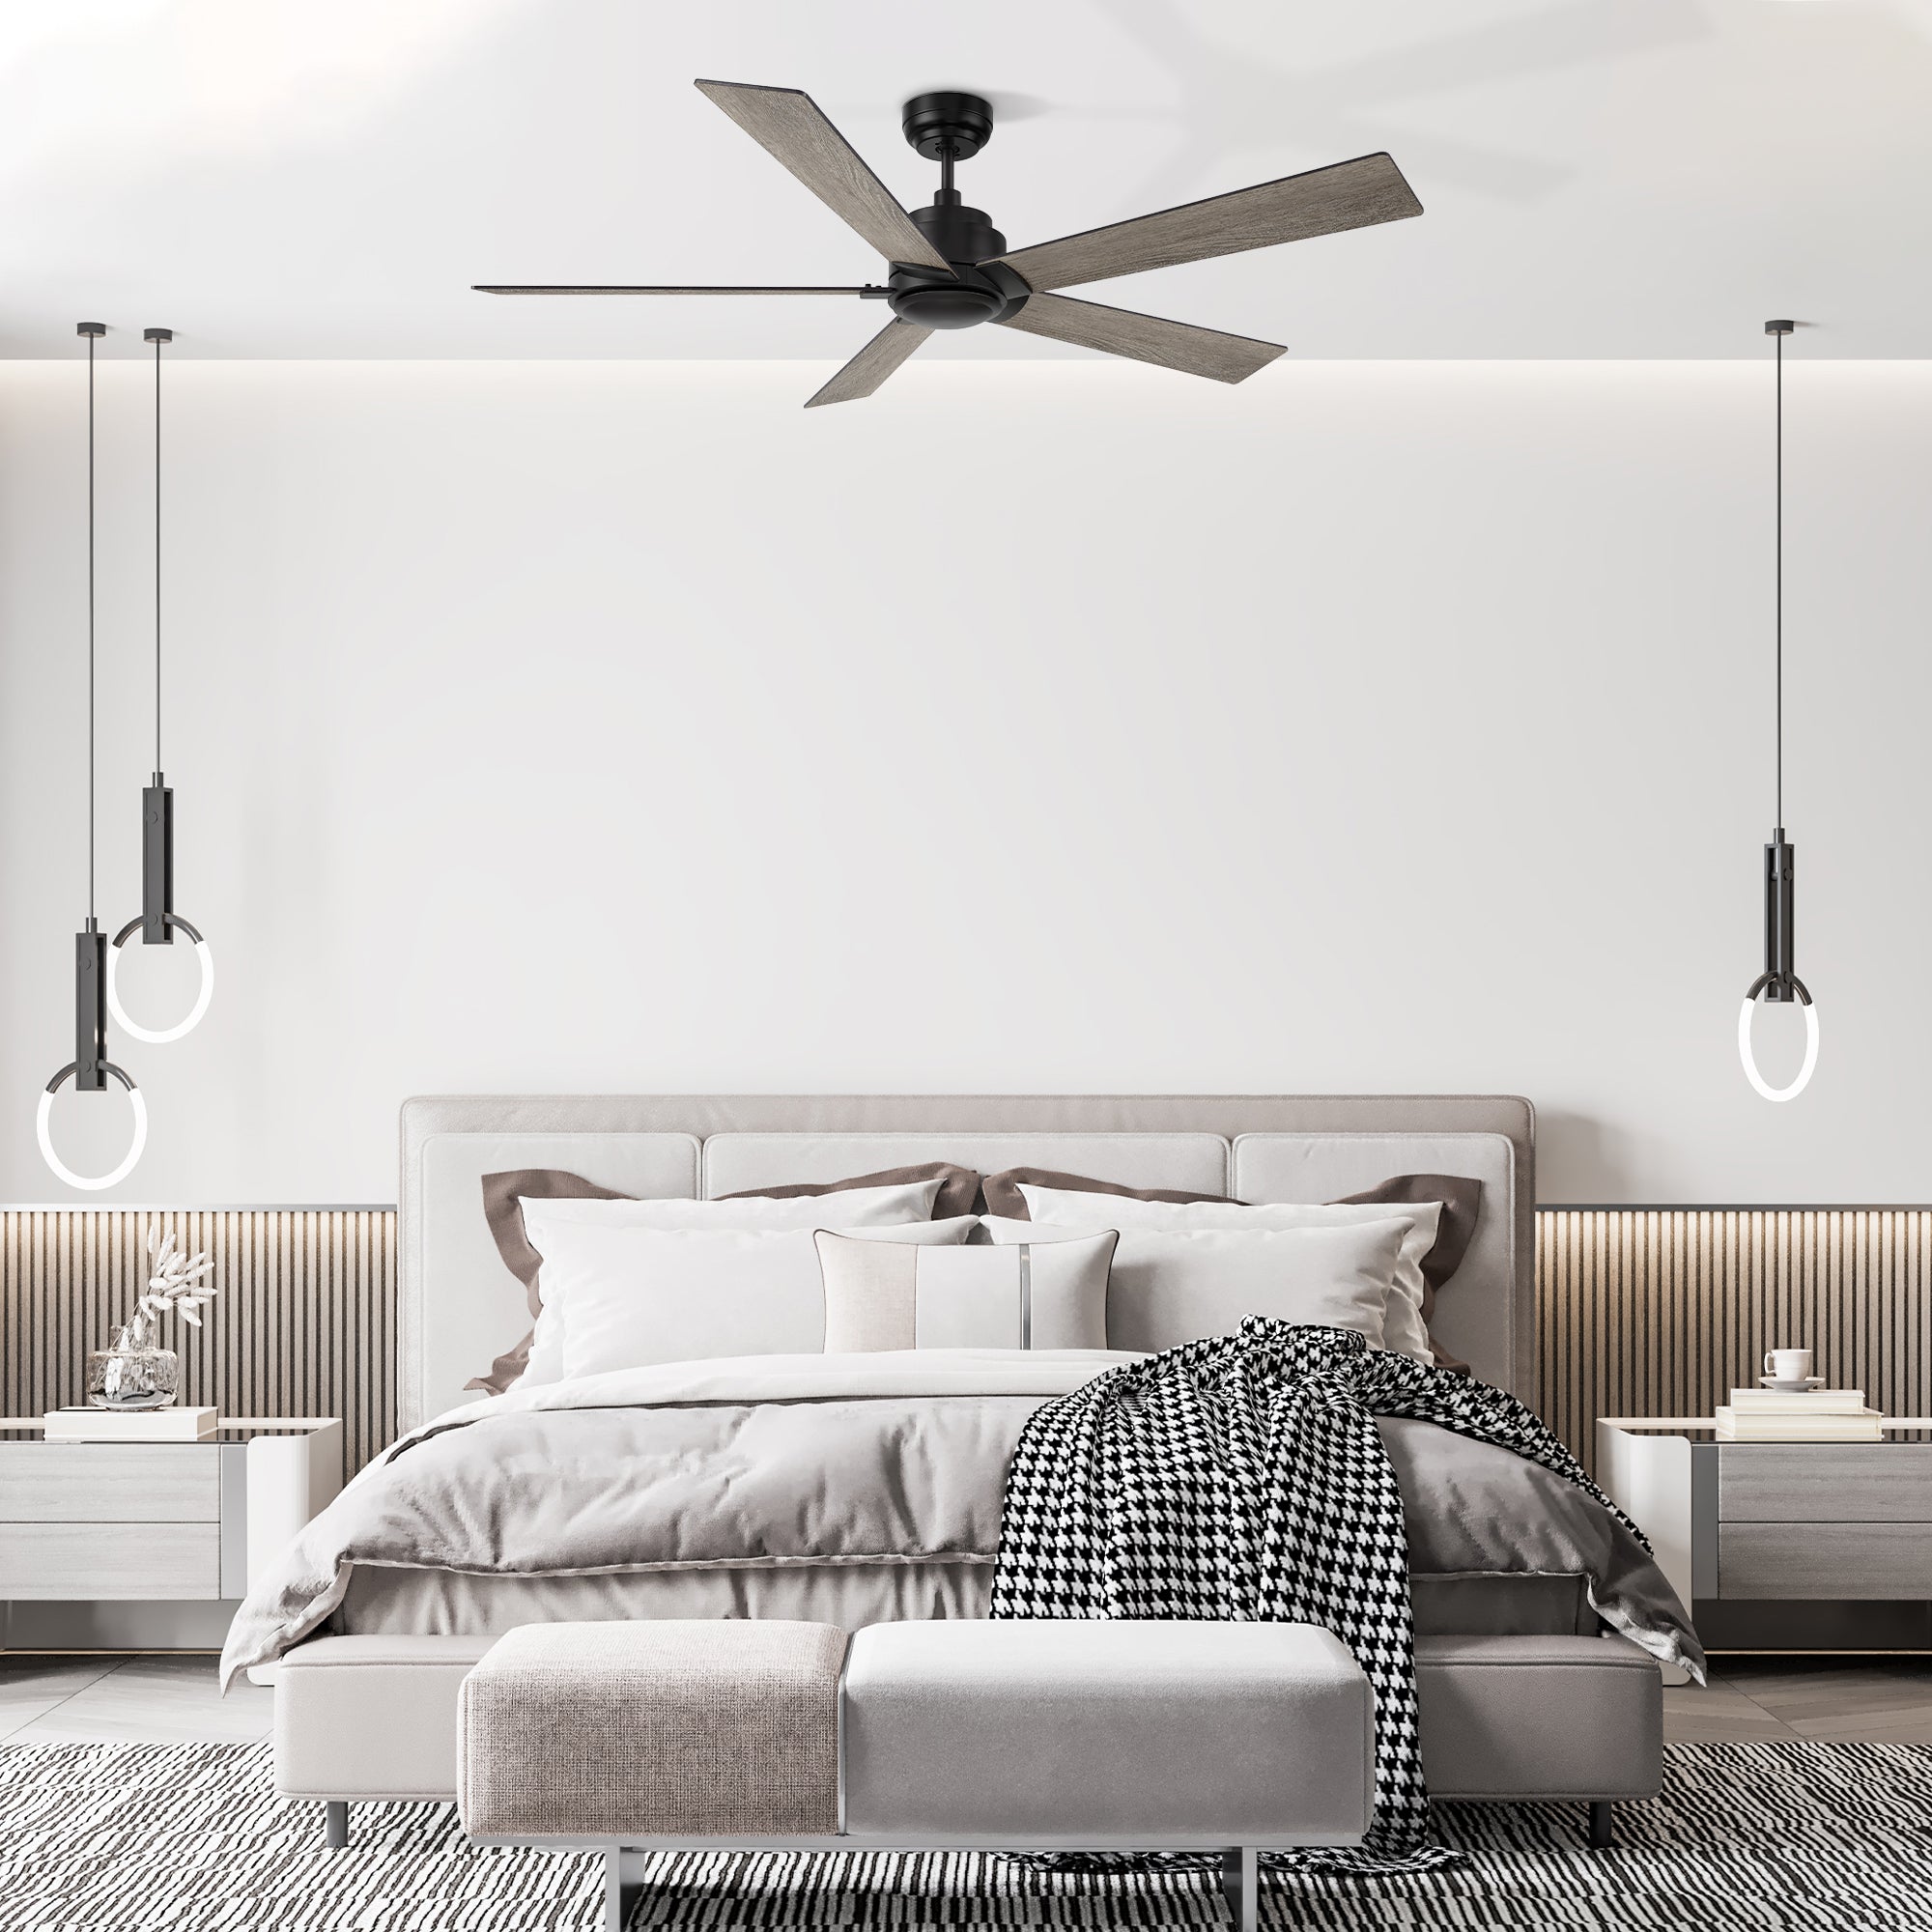 Carro Welland 60 inch remote control ceiling fans boasts a simple design with a Black finish and elegant Plywood blades, will keep your bedroom cool and stylish. 